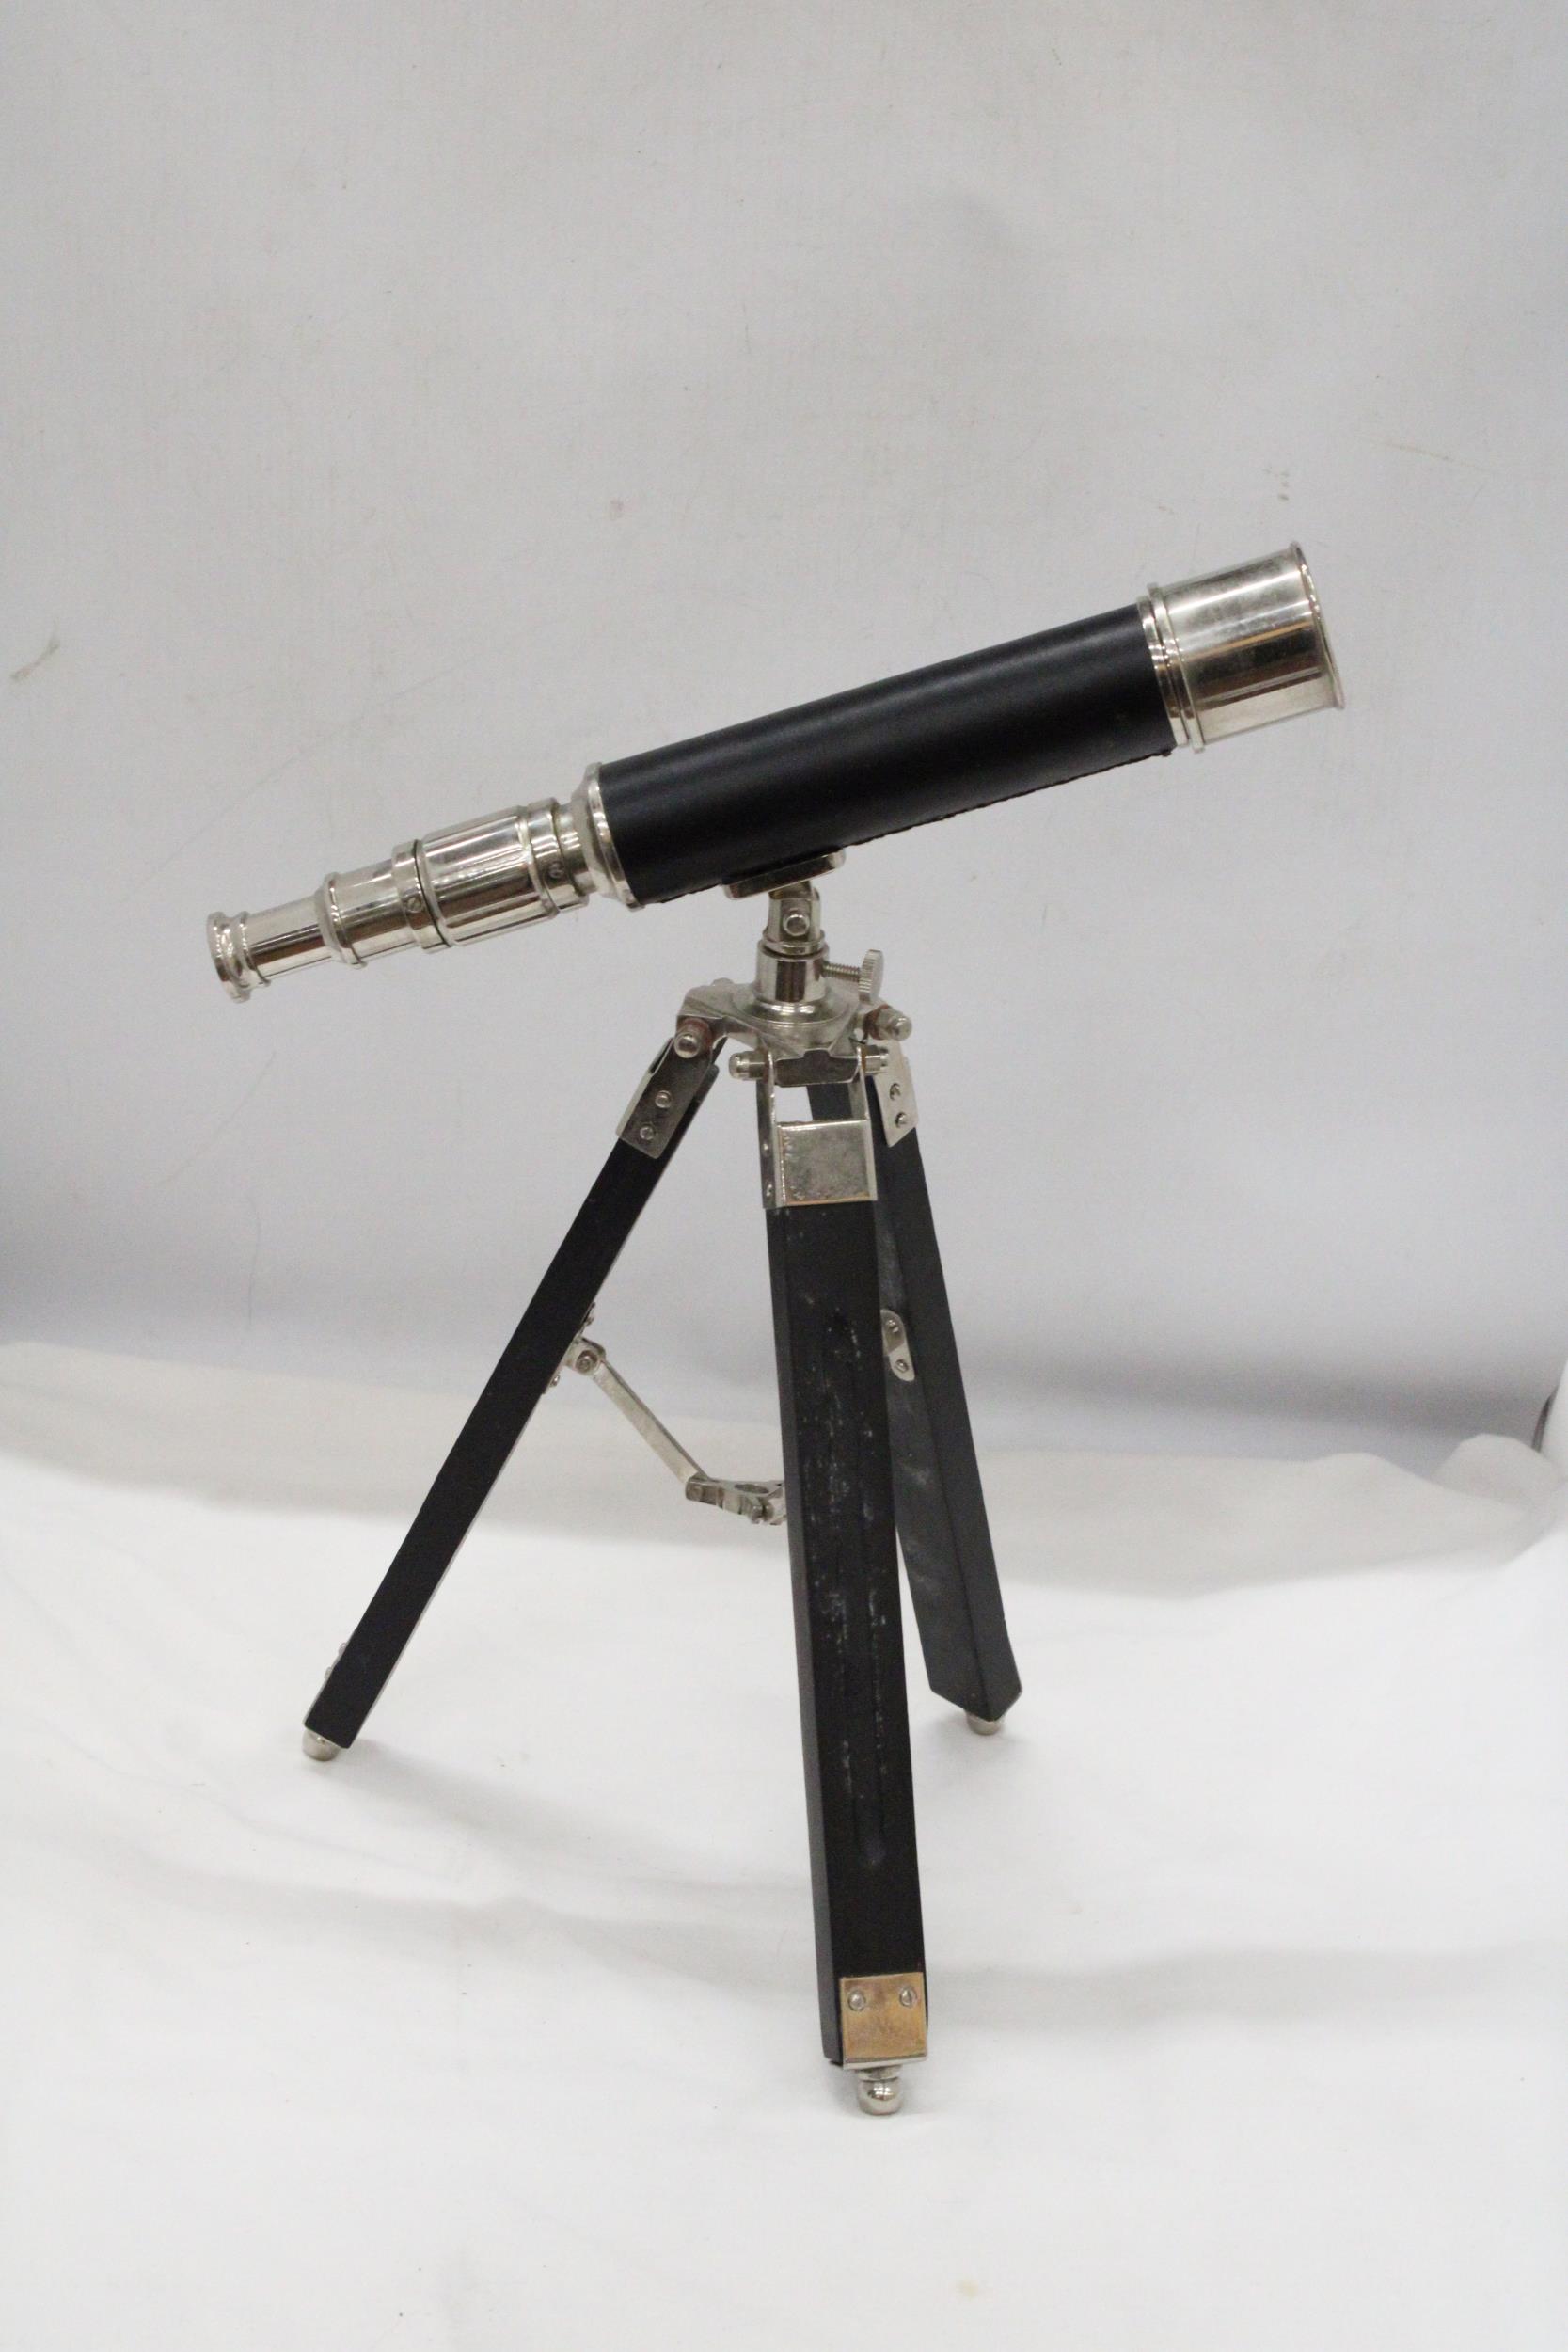 A CHROME TELESCOPE WITH TRIPOD STAND - Image 3 of 4